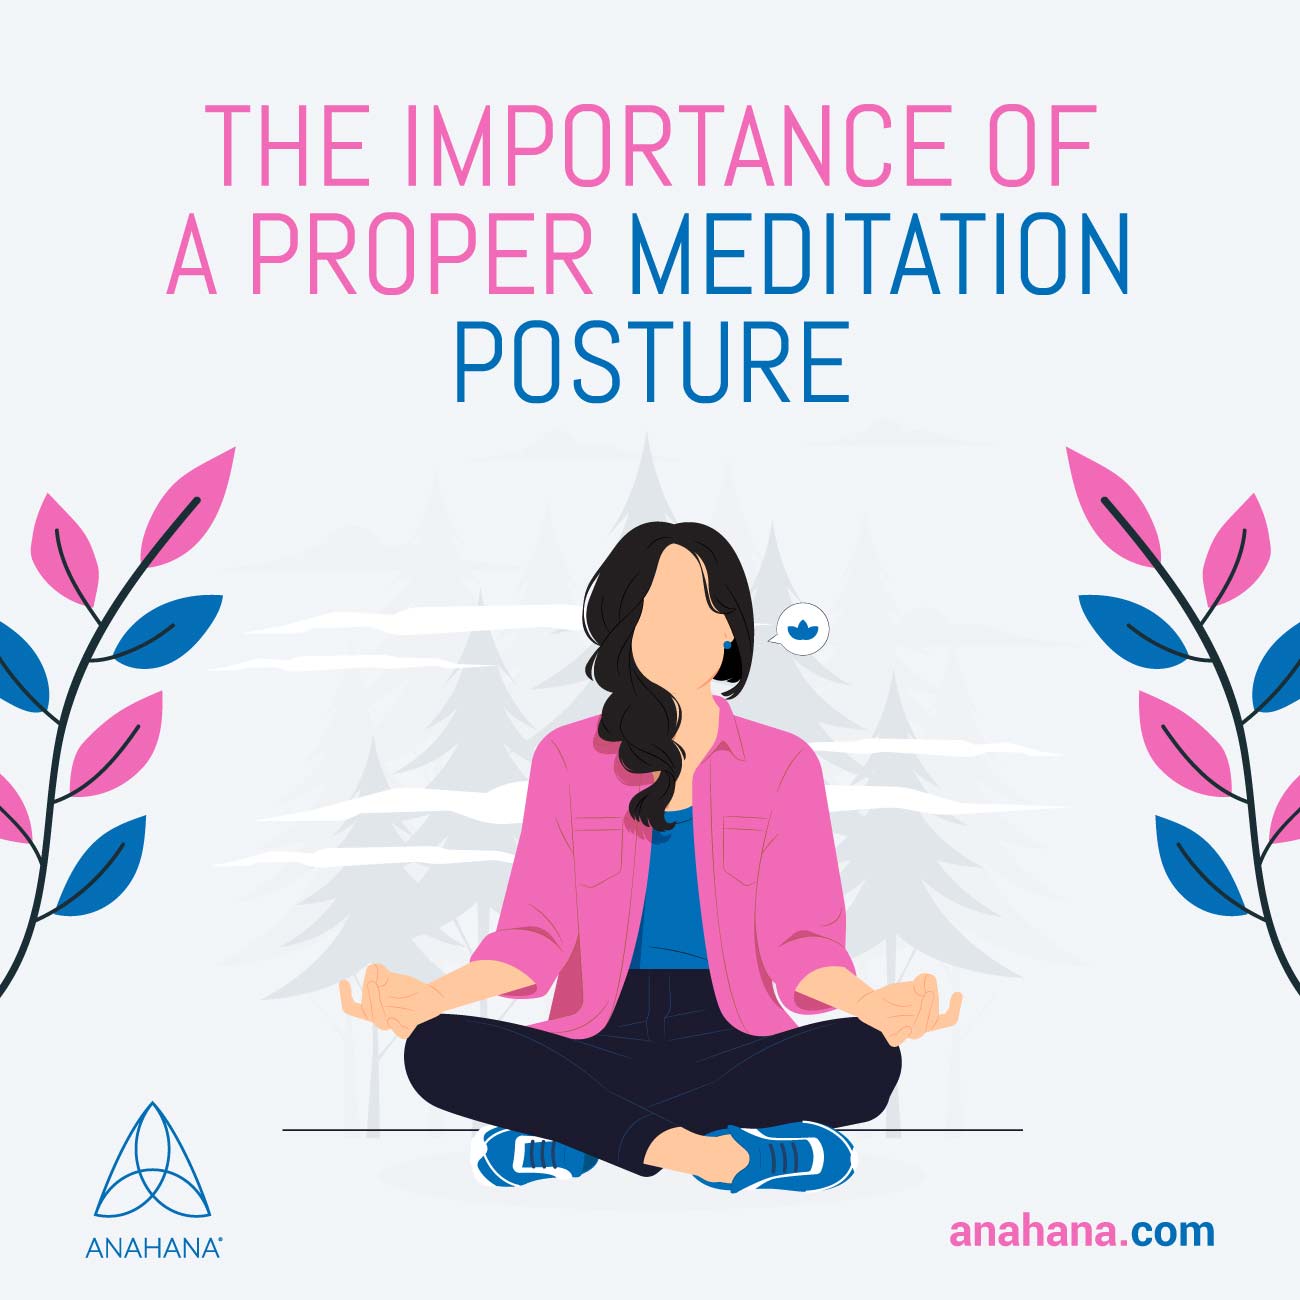 7 Meditation Positions From Sitting To standing